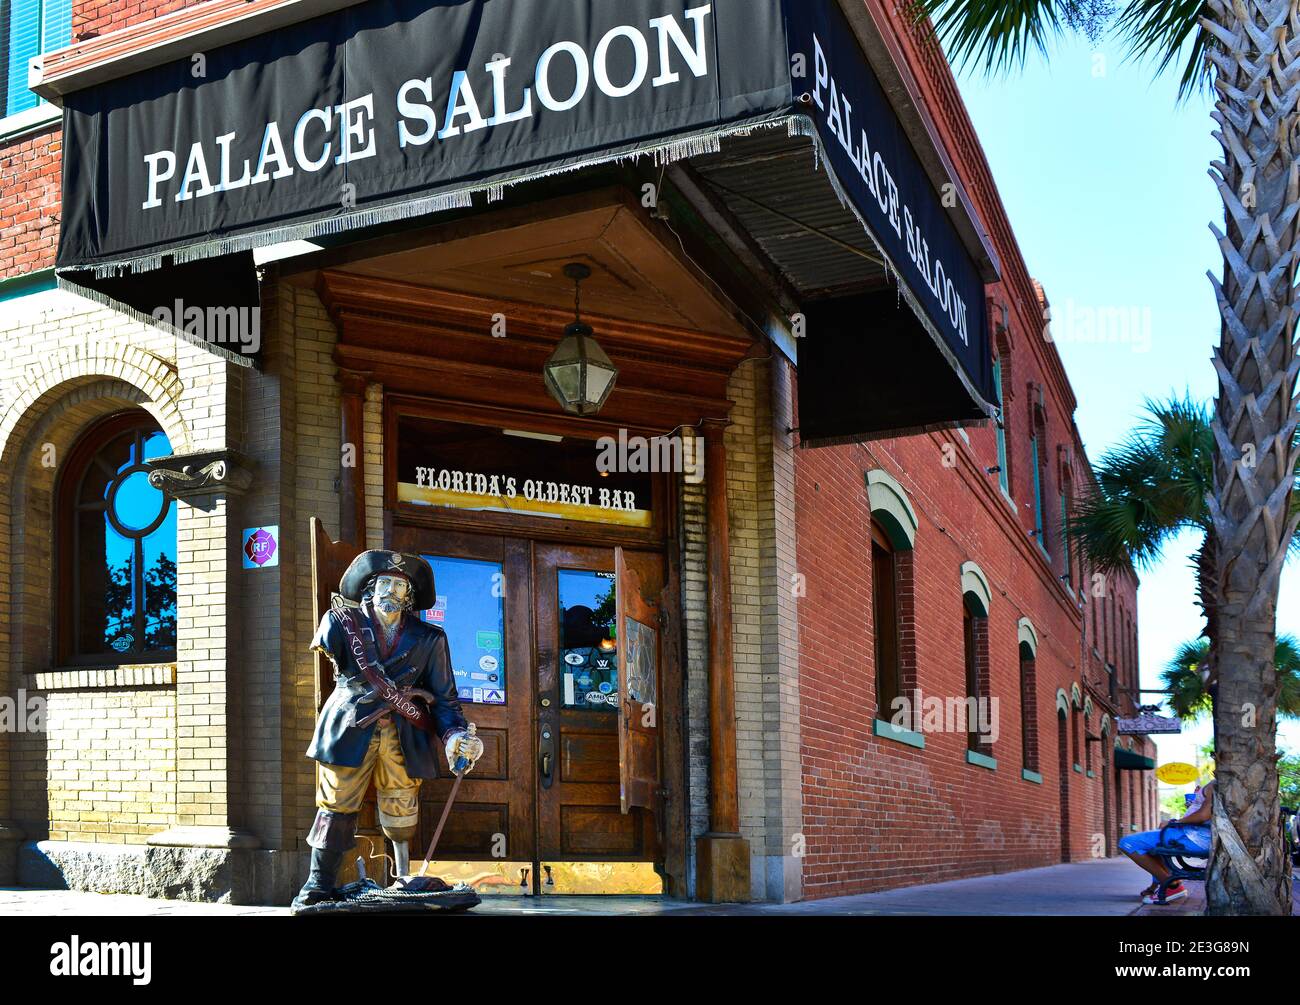 A one legged pirate statue greets patrons as they enter the Oldest Bar in Florida, the Palace Saloon in Fernandina Beach, FL on Amelia Island, Stock Photo